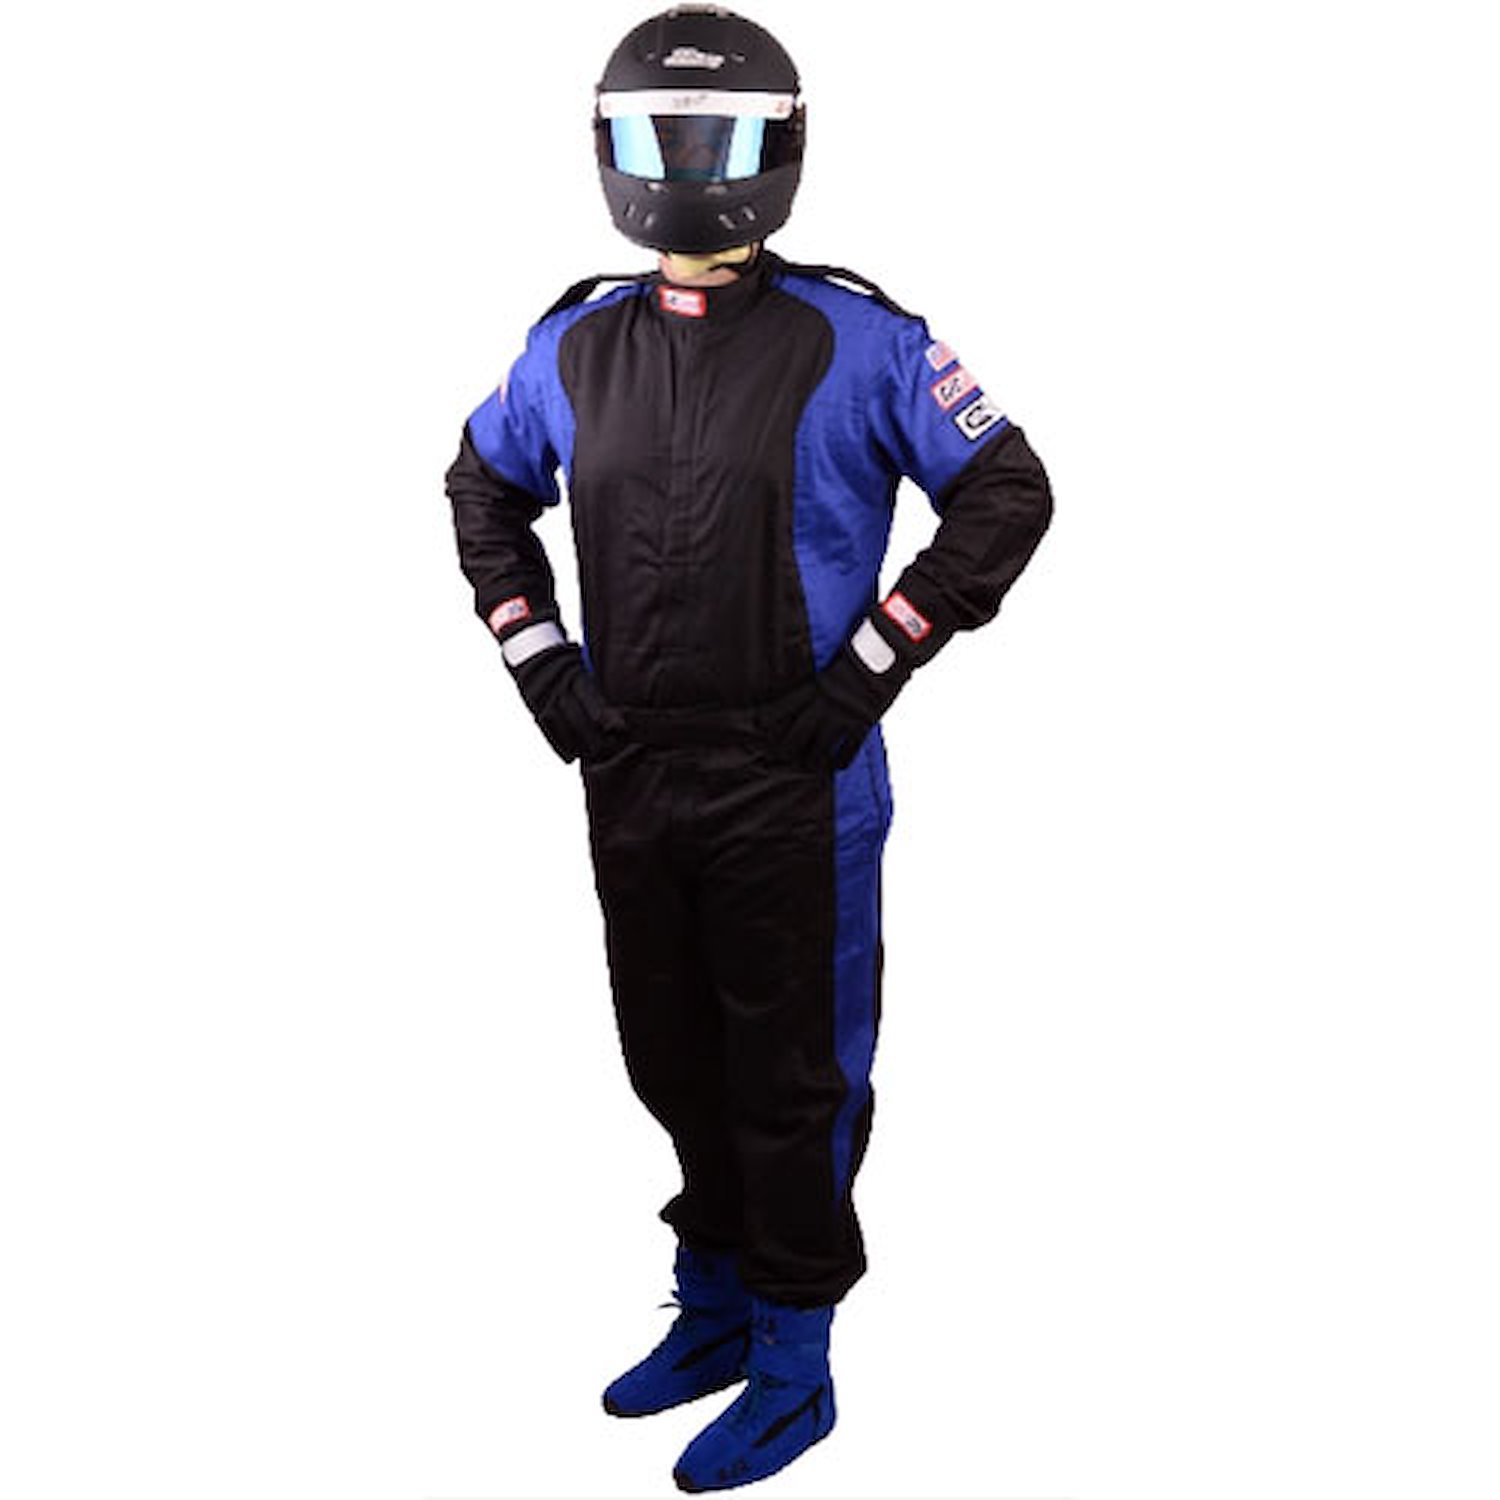 Elite Series Driving Suit 3.2 A/1 SFI Rating